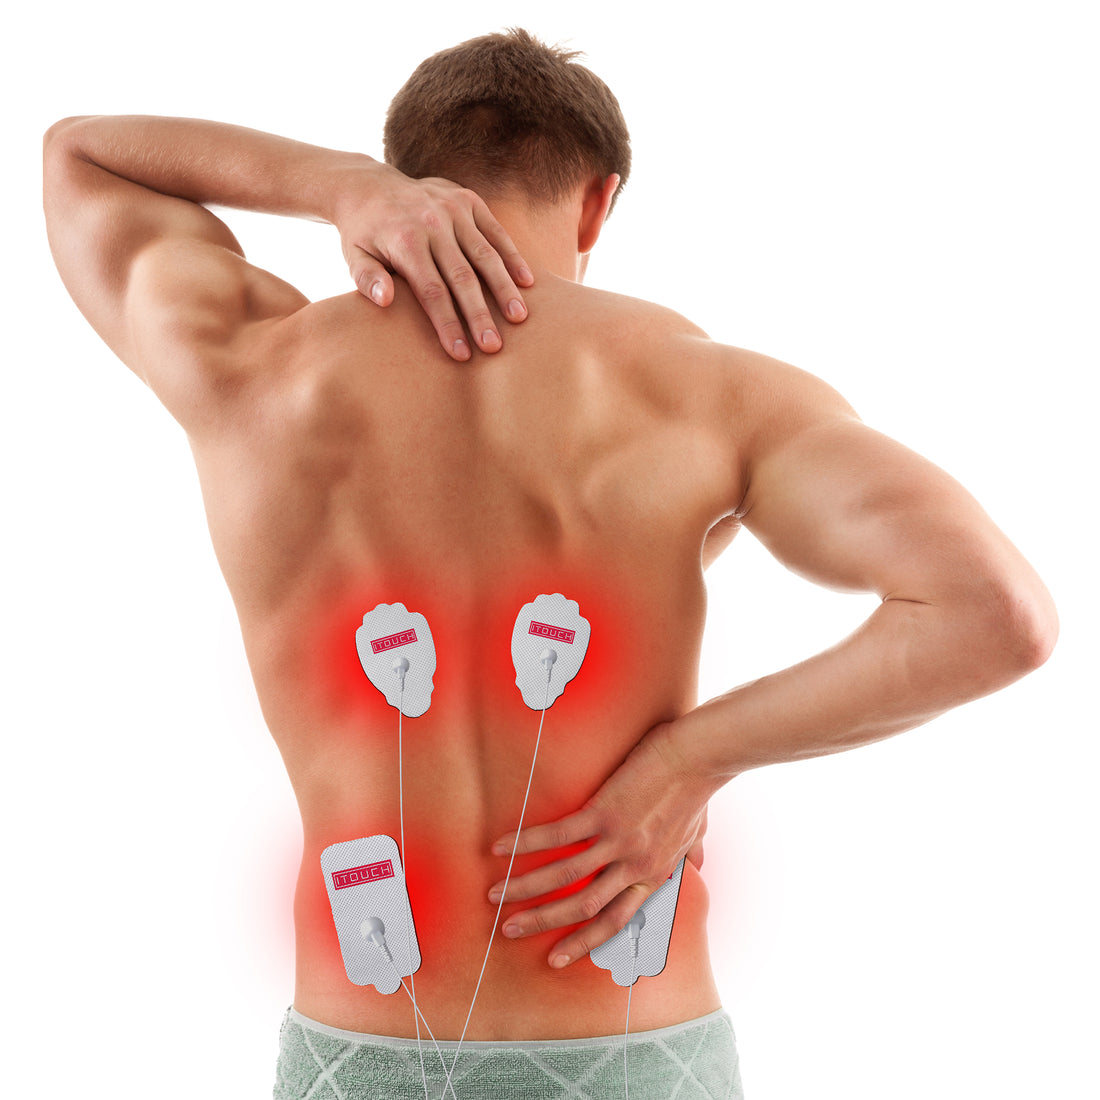 TENS Unit for Lower Back Pain: Placement and Instructions